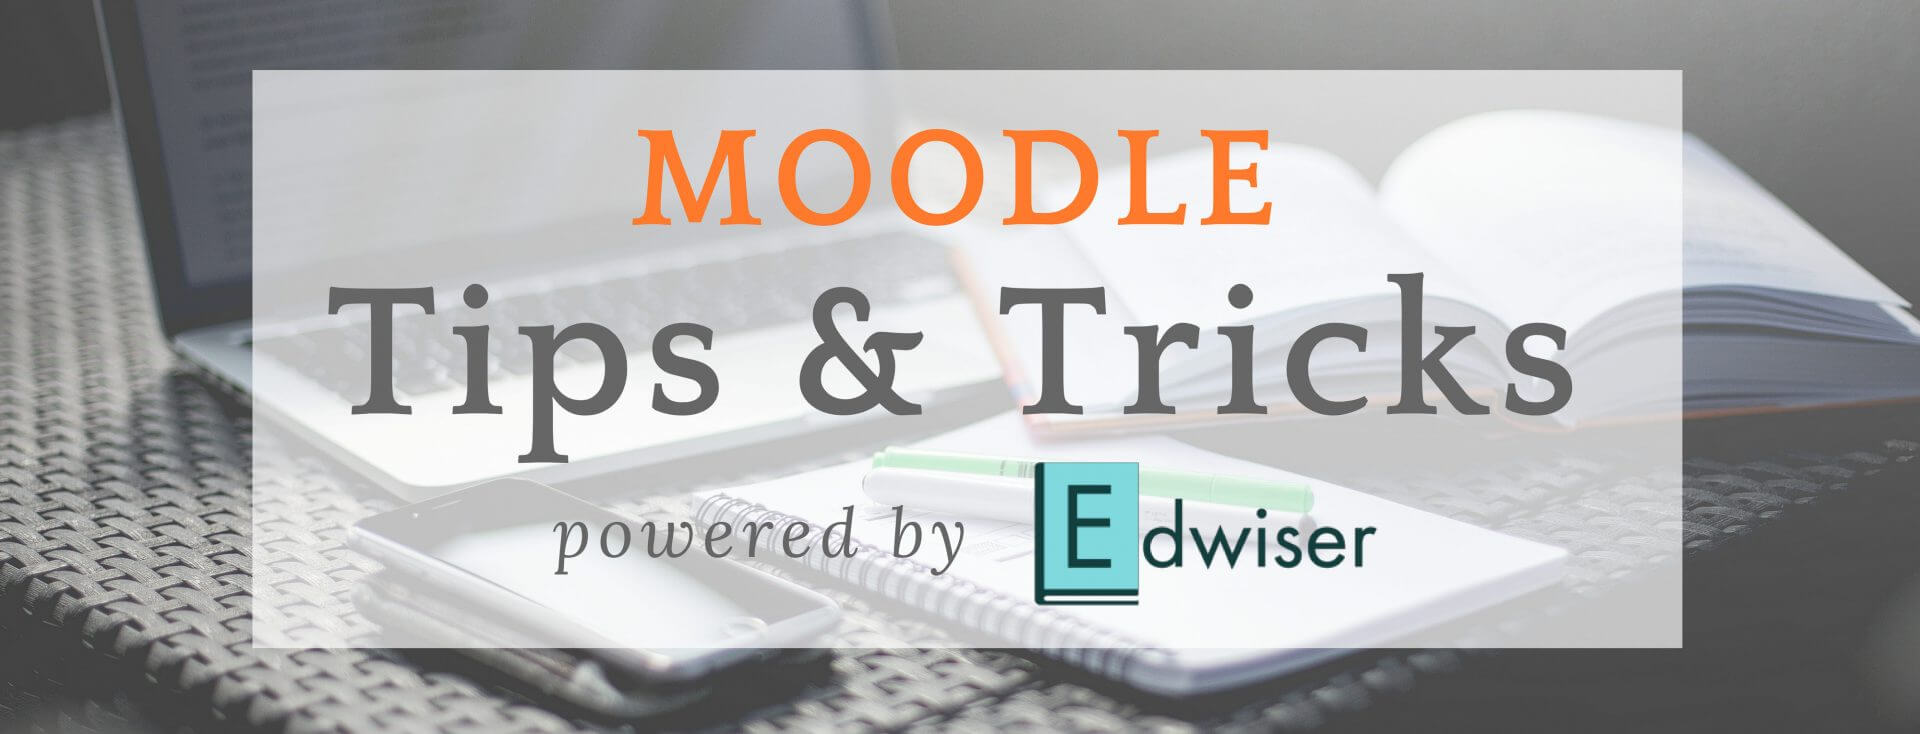 Moodle Tips & Tricks - Powered by Edwiser